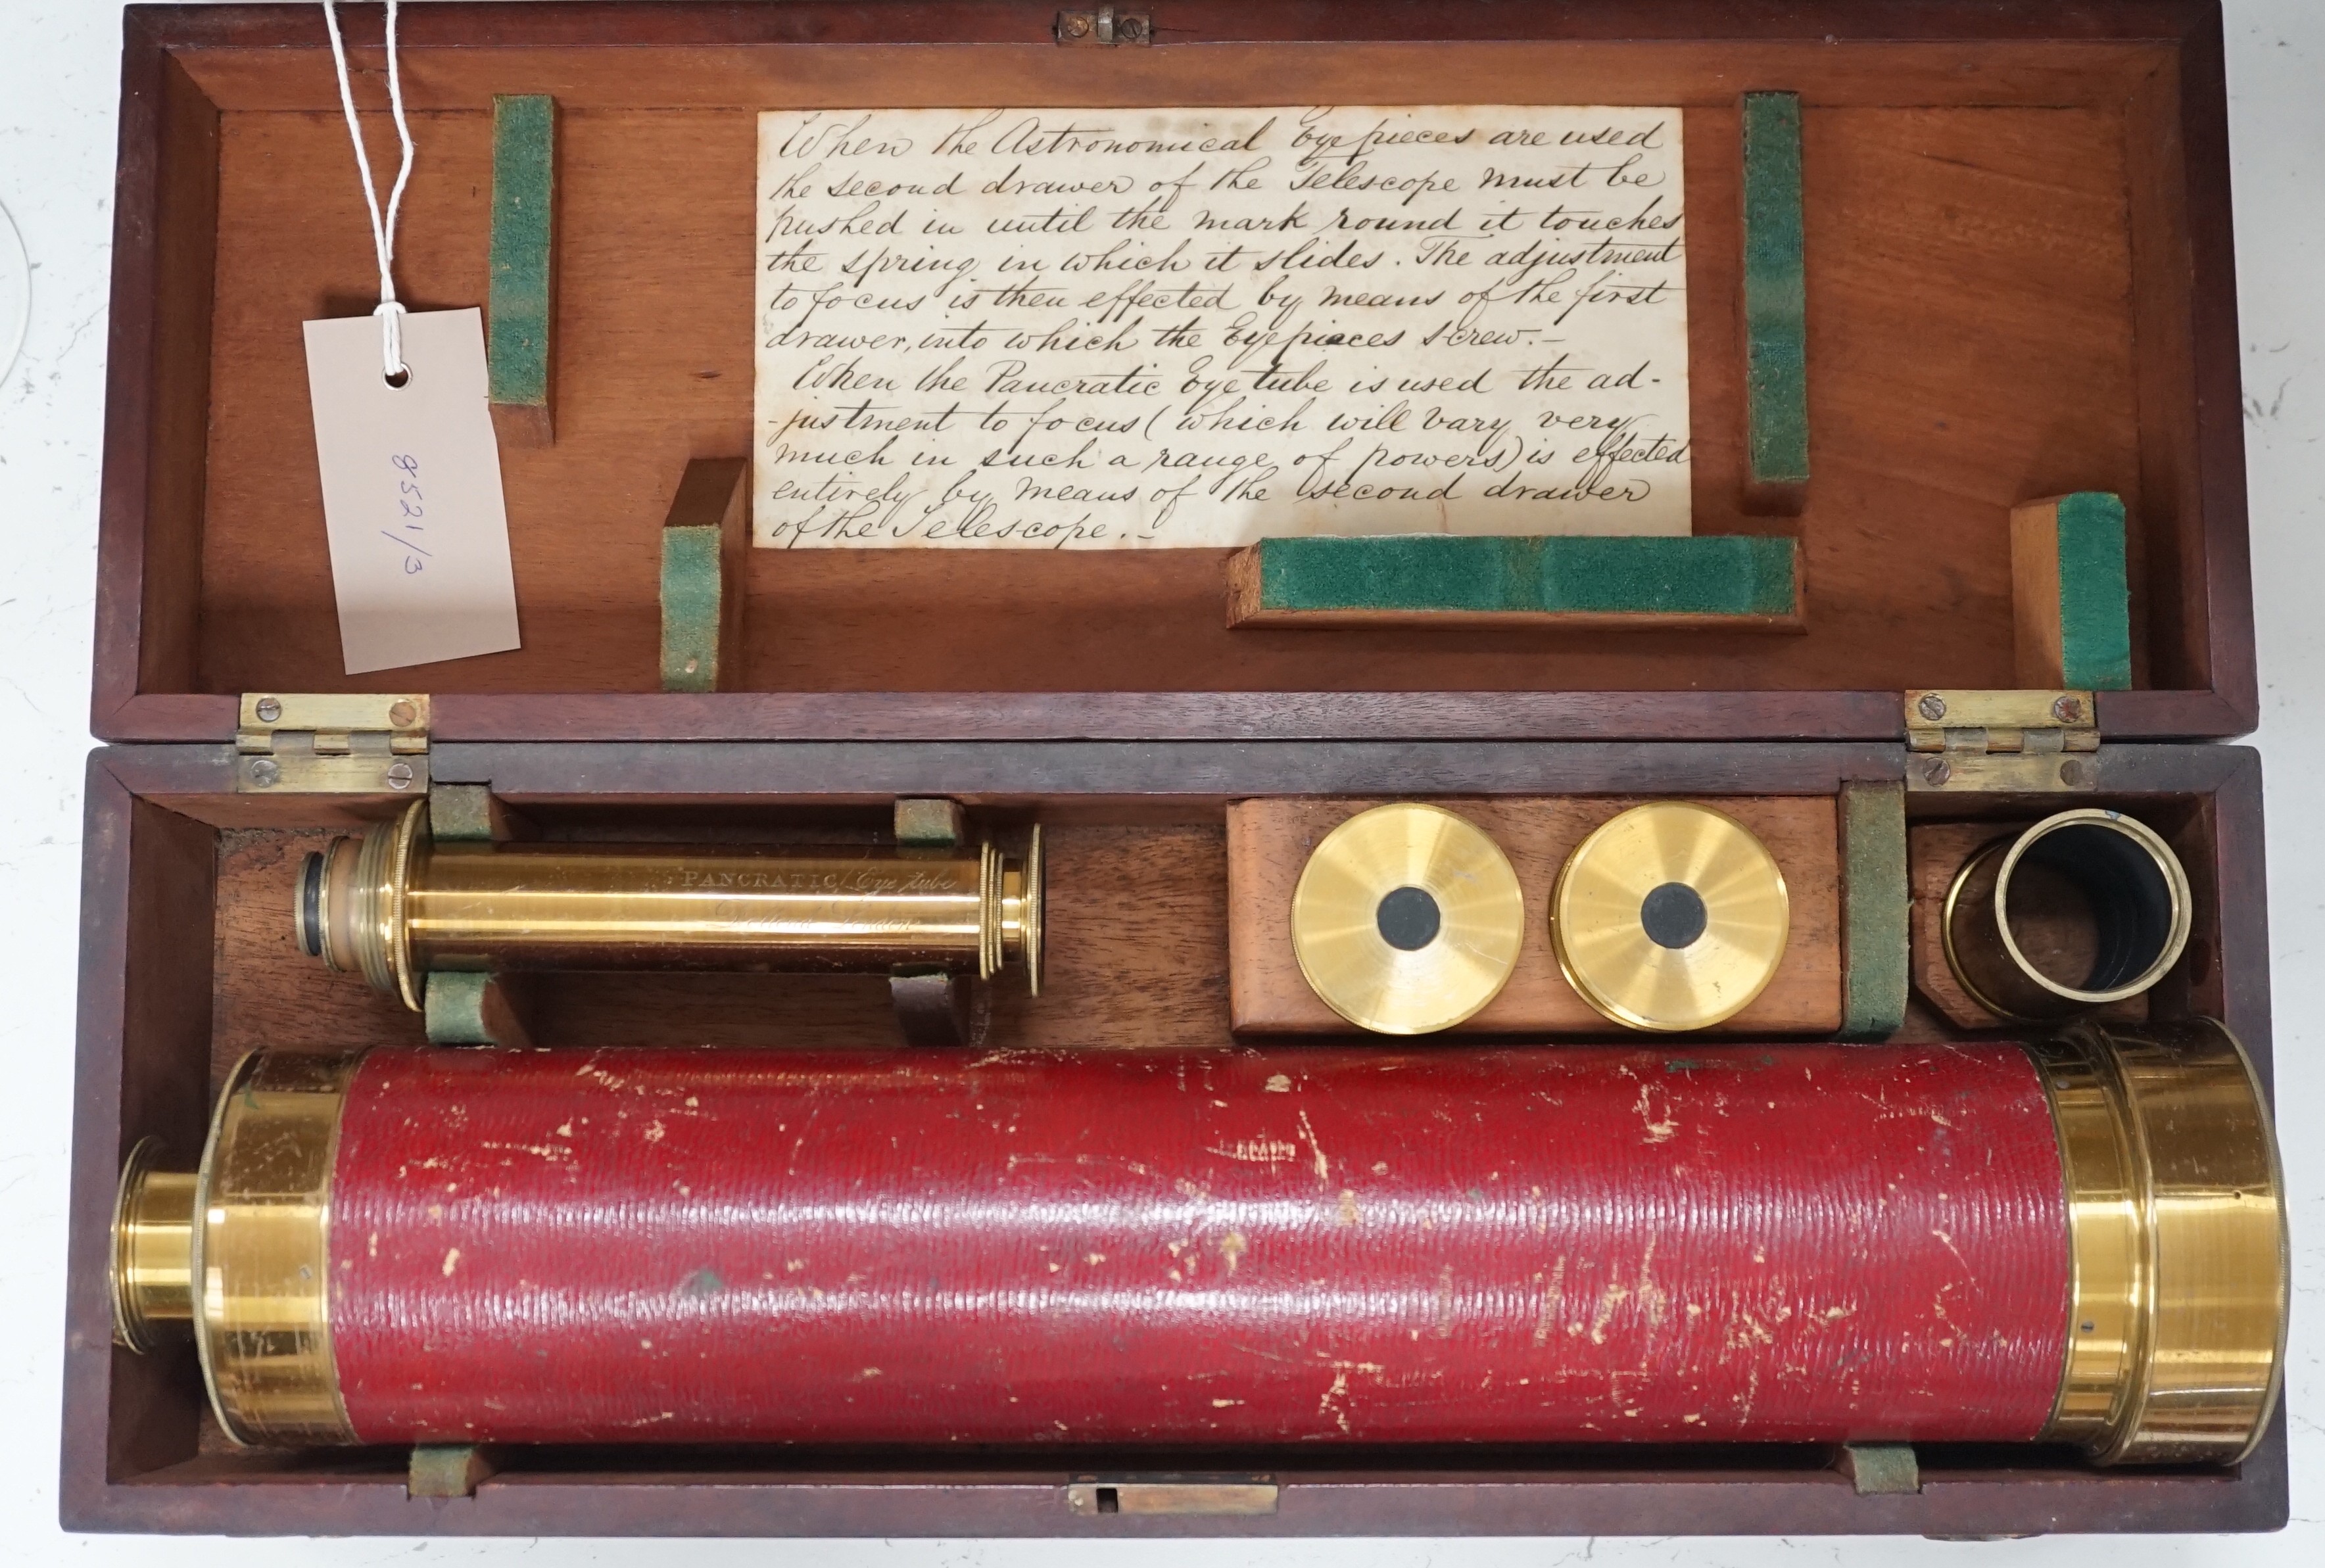 A cased early 19th century brass astronomical telescope, by Dollond, London, with separate screw fitting ‘Pancratic eye tube’ and other optics with sun filters, case 40cm